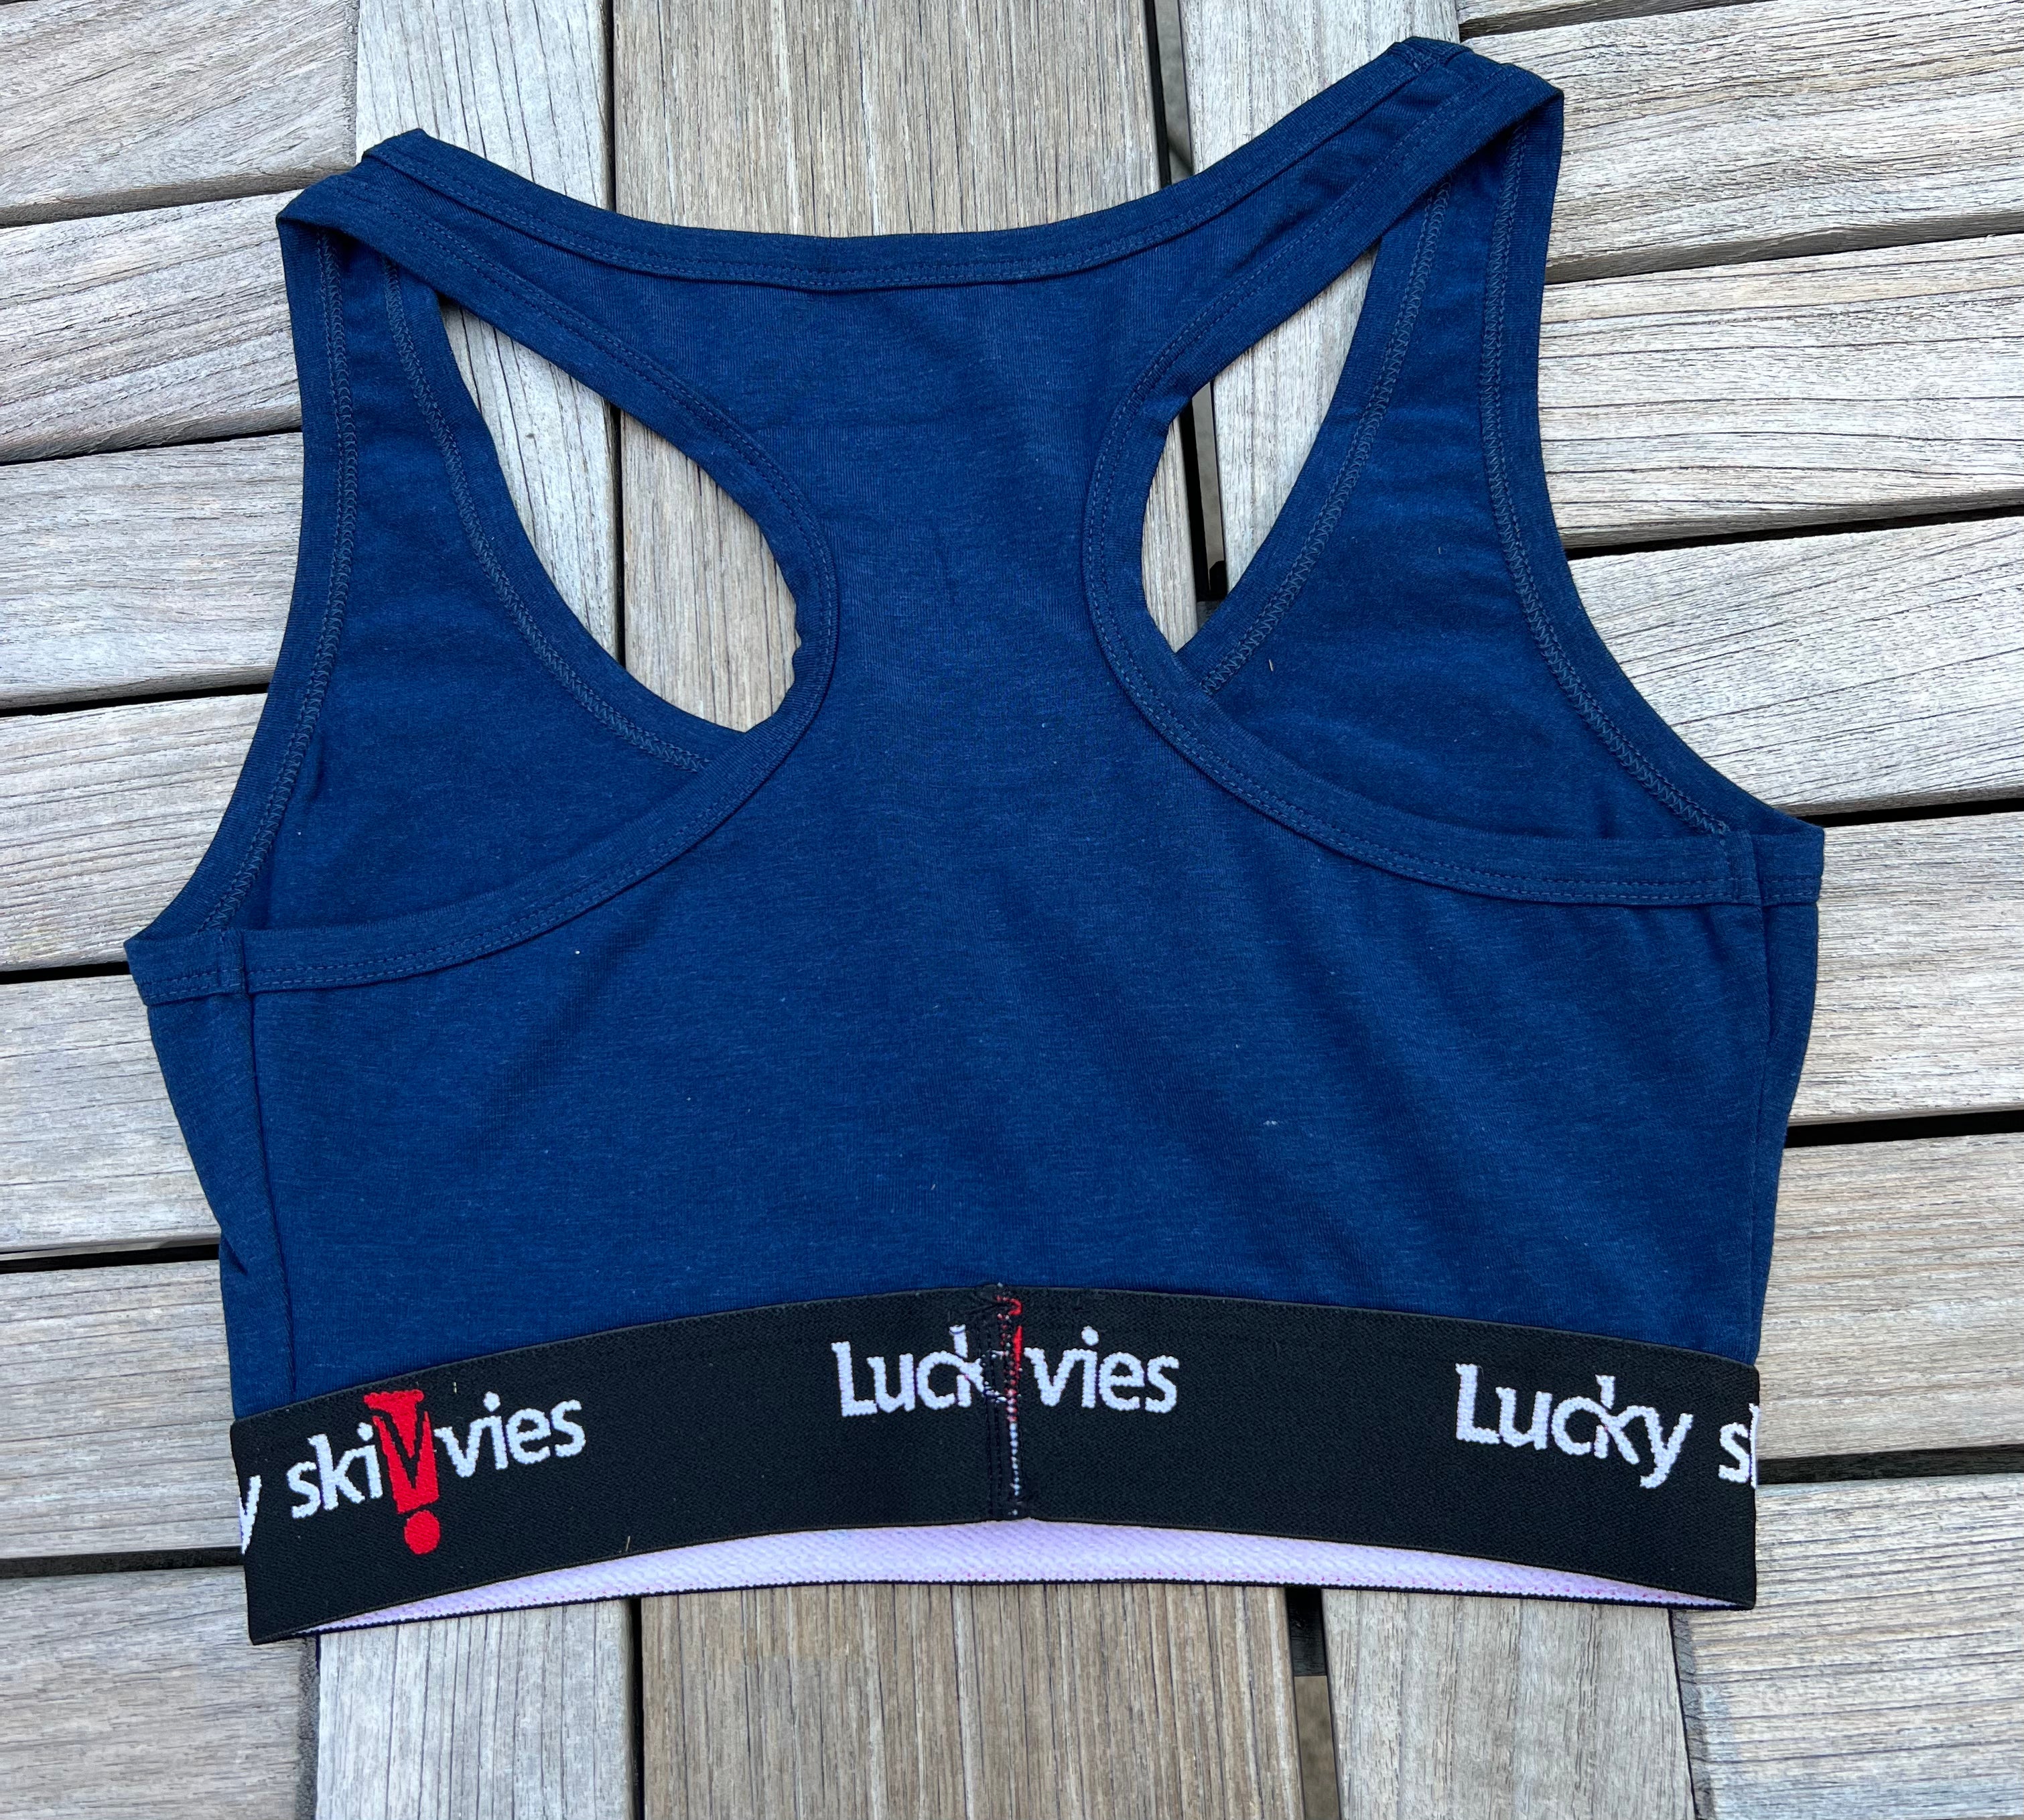 Ufluckyskivvies Promoted Hey Reddit! Introducing Lucky Skivvies: The  Gender-Inclusive Boxers That Stay Put, Feel Amazing, and Have a Secret  Stash Pocket! Use Code Reddit15 for 15% off your first order. QWOC owned